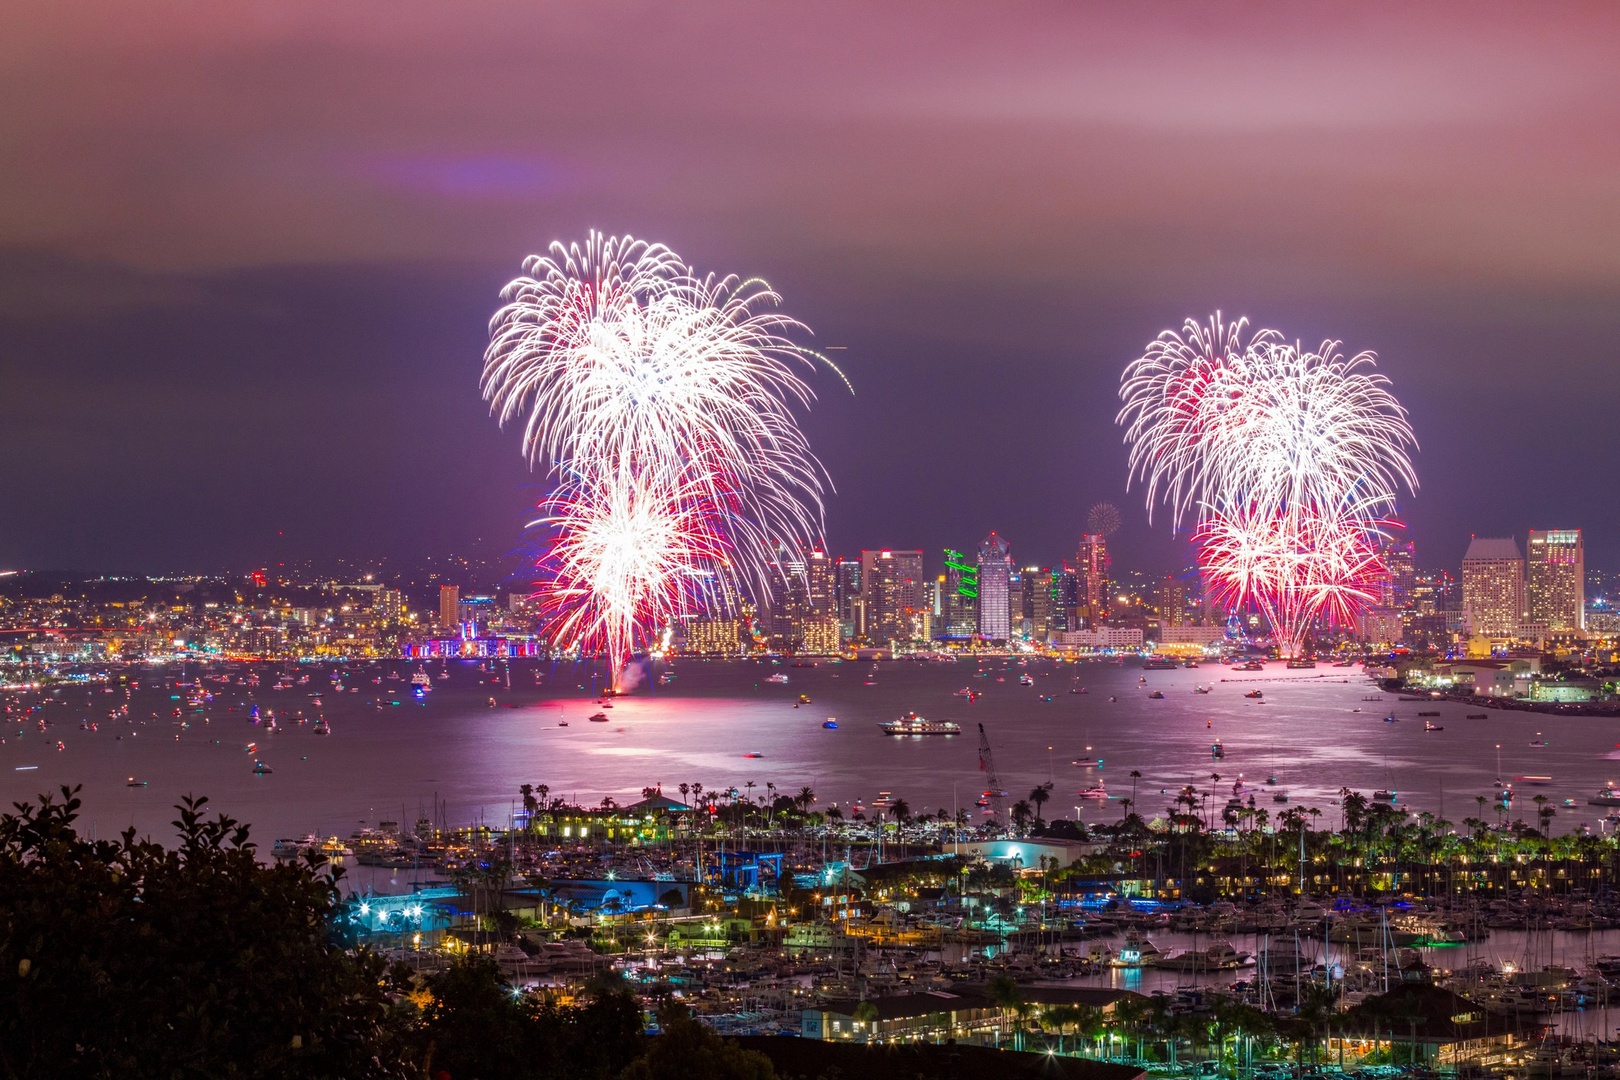 The best views of 4th of July fireworks